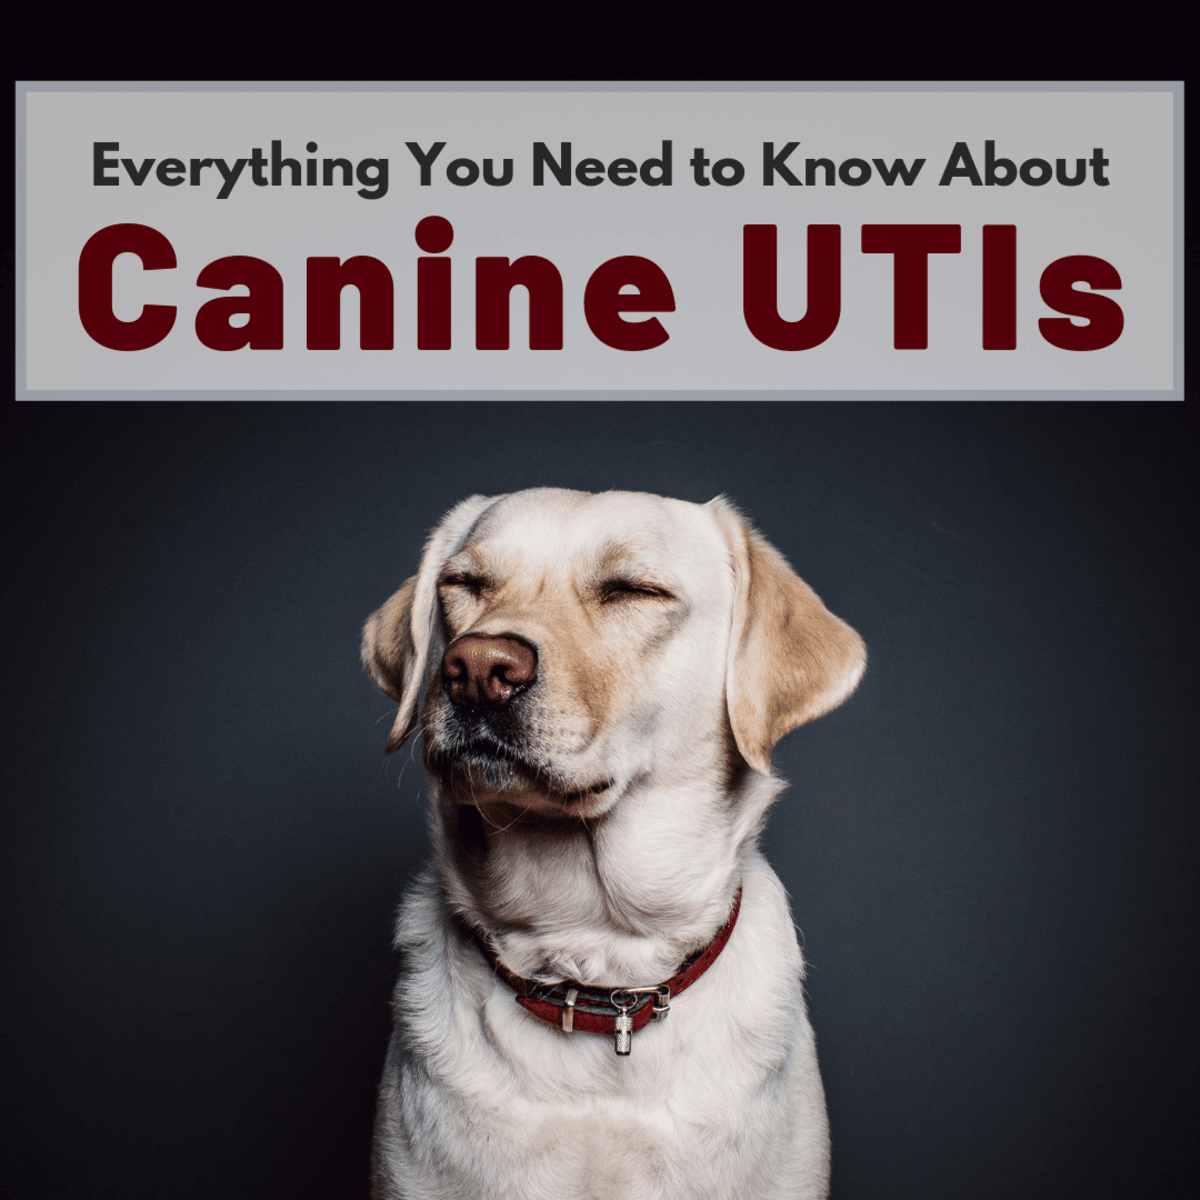 Urinary Tract Infections in Dogs: What You Should Know